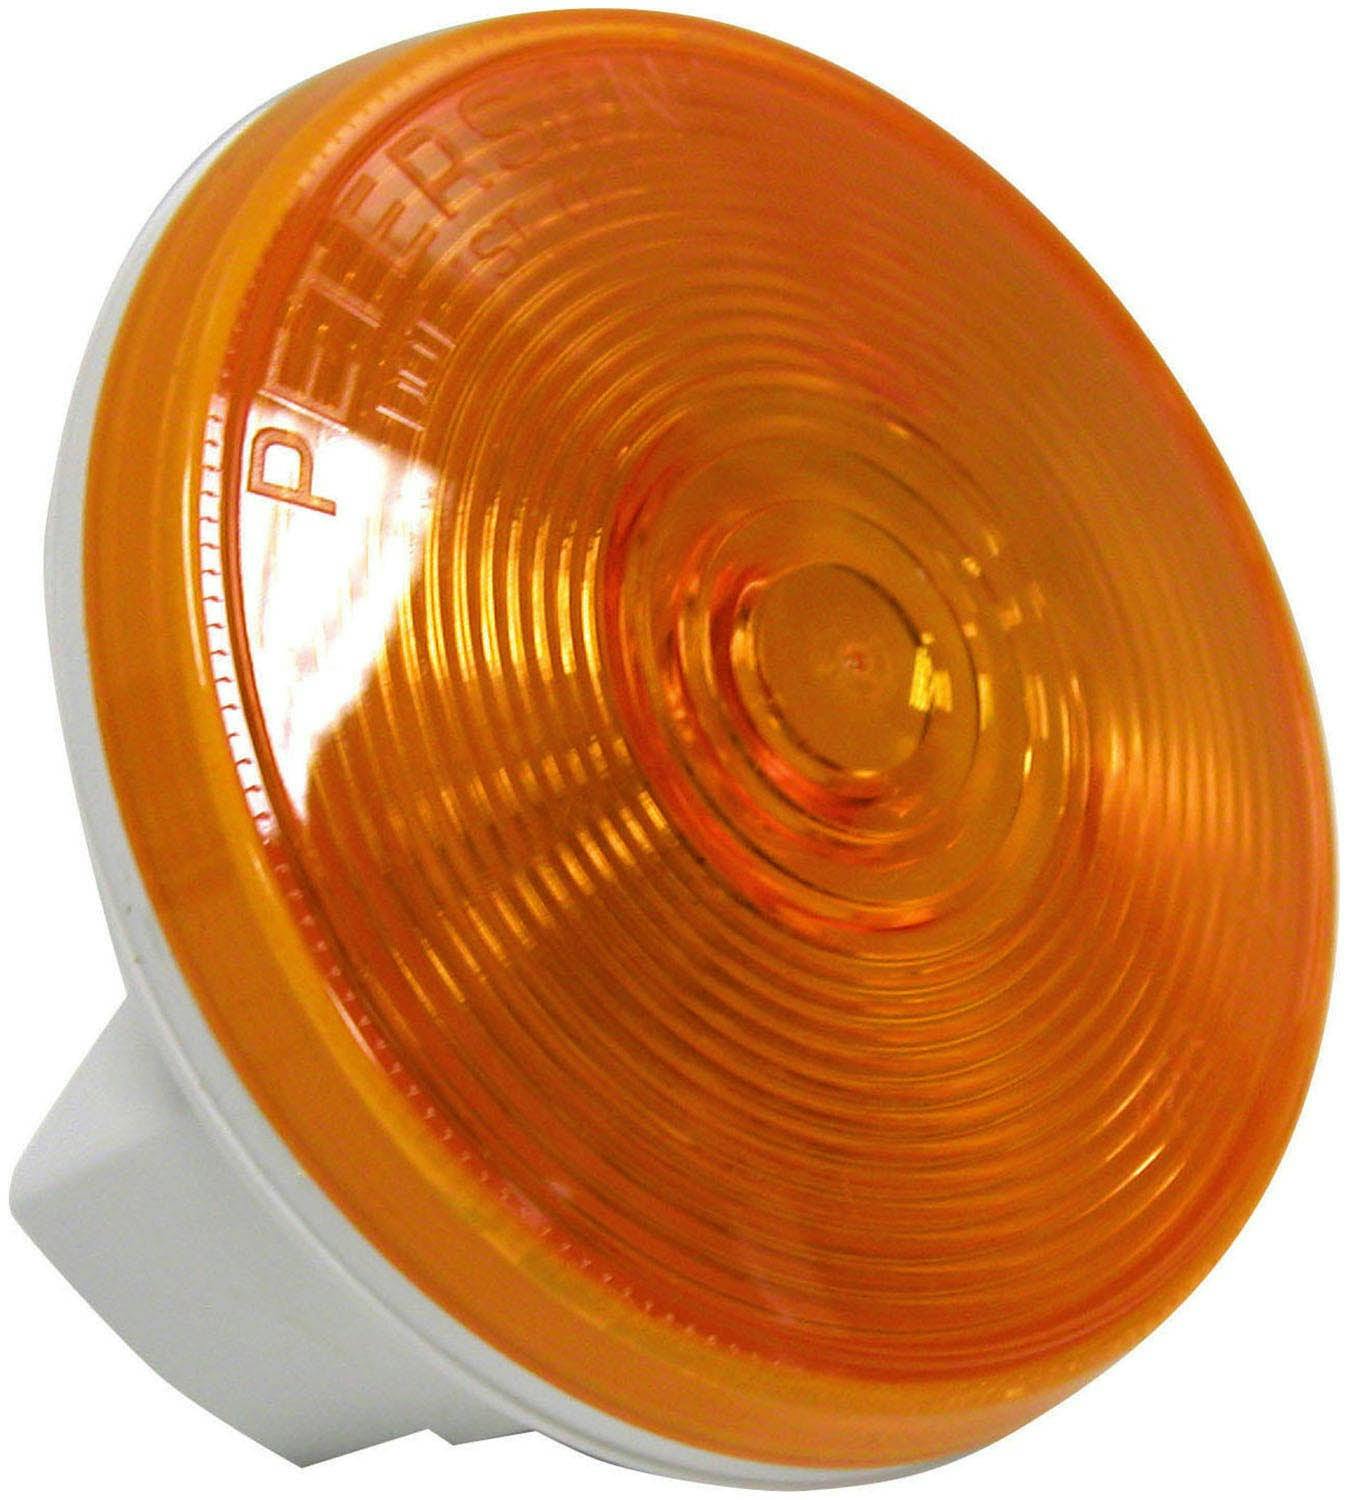 Incandescent Turn Signal, Round, 4", amber, bulk pack (Pack of 48)